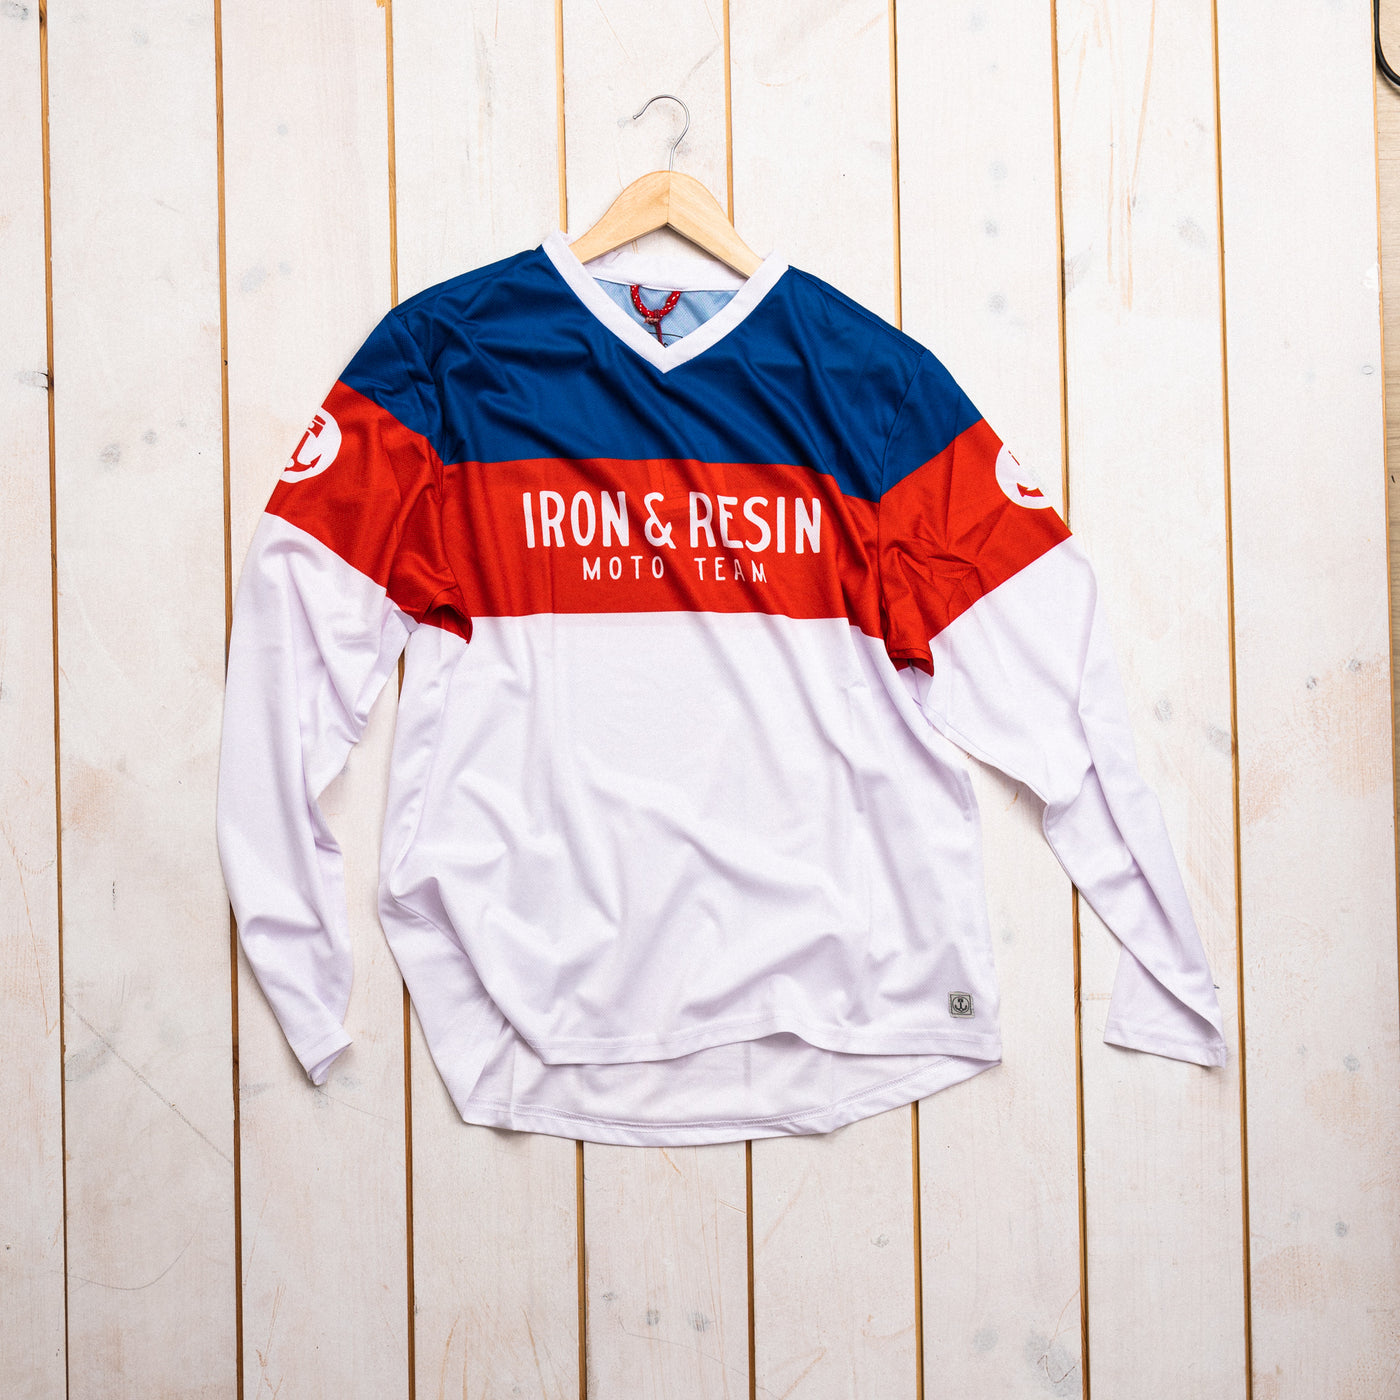 Iron and Resin - Long sleeve shirt - TRI-color Red-blue-white - Race